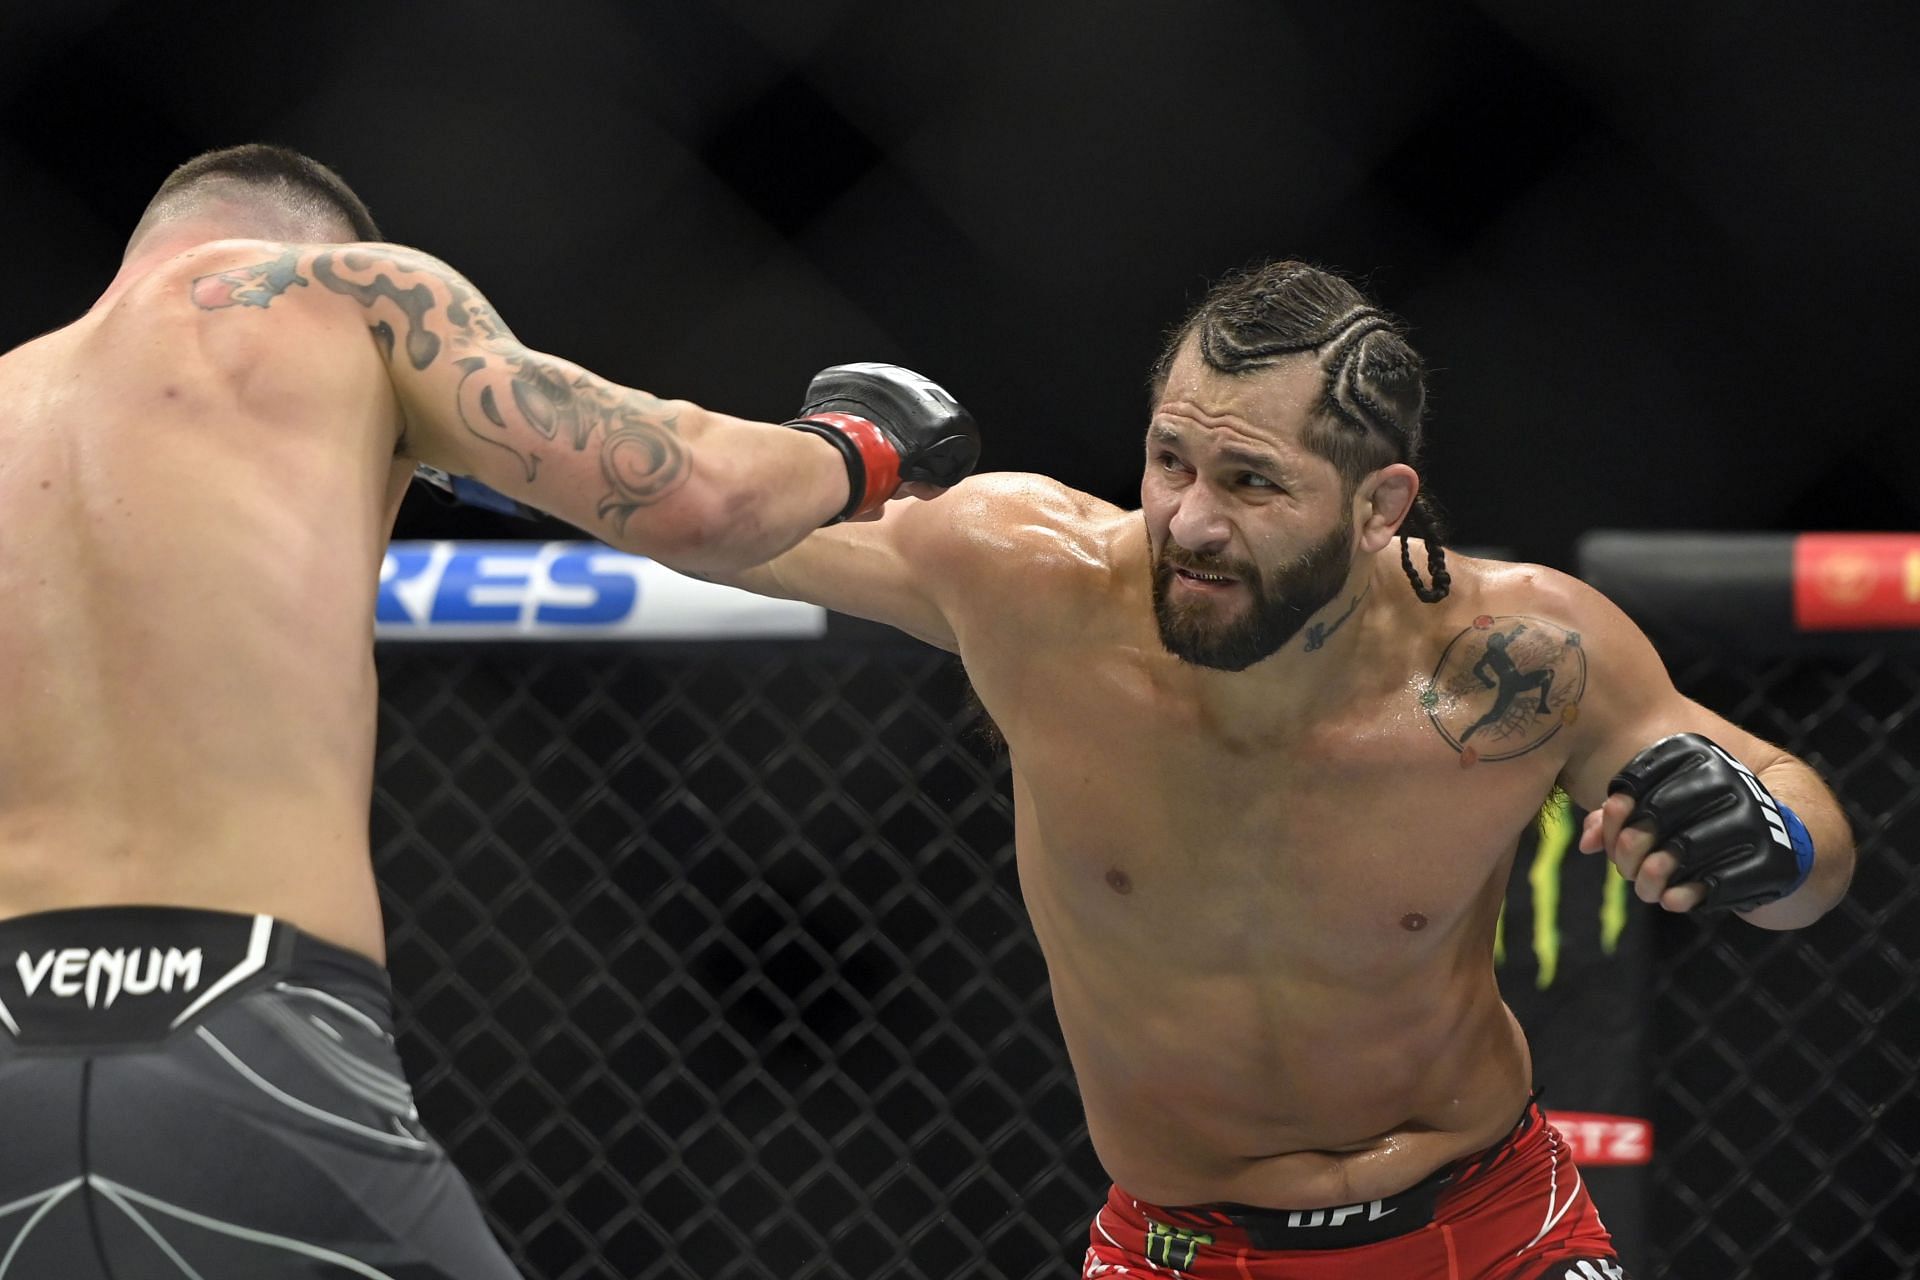 A fight between Jorge Masvidal and Conor McGregor would be a winnable one for both men